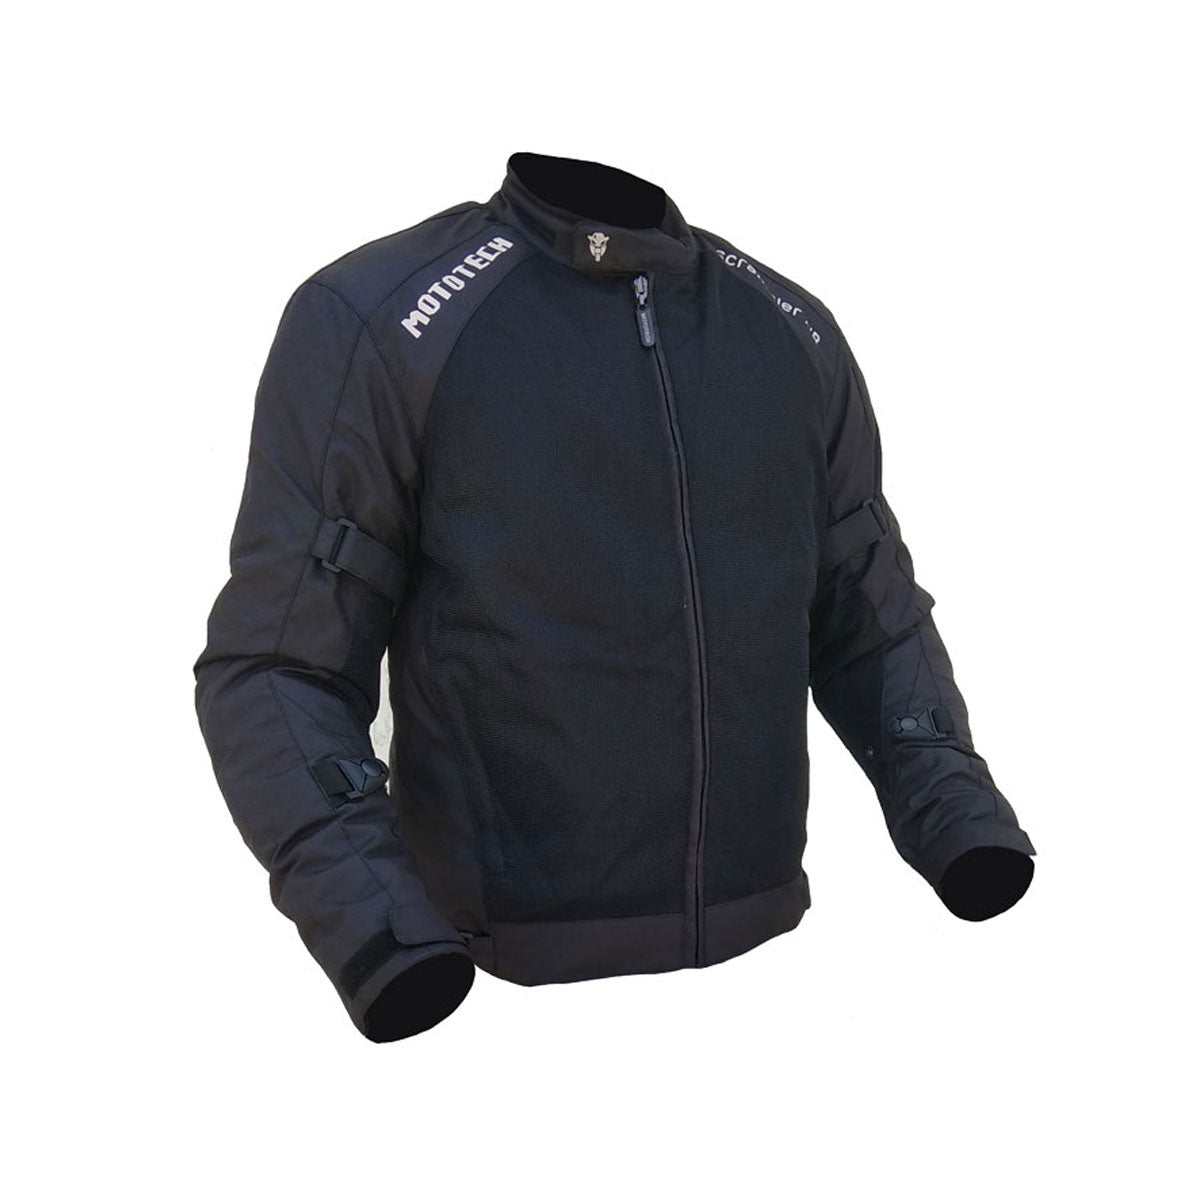 Royal Enfield Women's Breeze Riding Jacket (Black, Medium) CE Level 1  certified protectors at shoulders and elbows : Amazon.in: Car & Motorbike